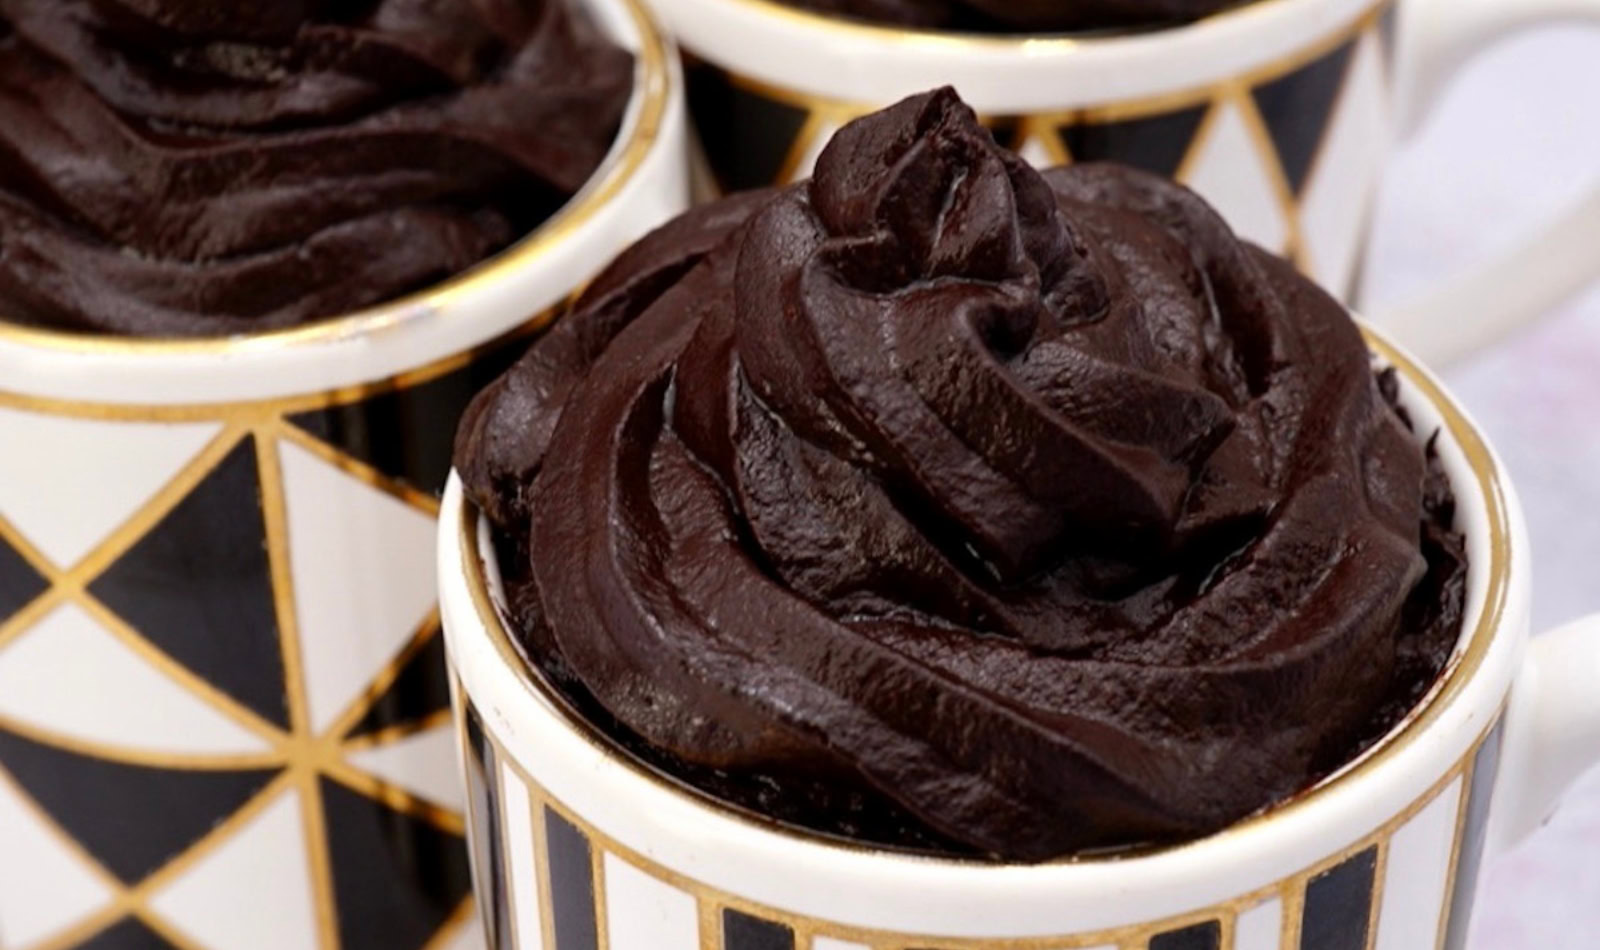 cups full of avocado chocolate mousse